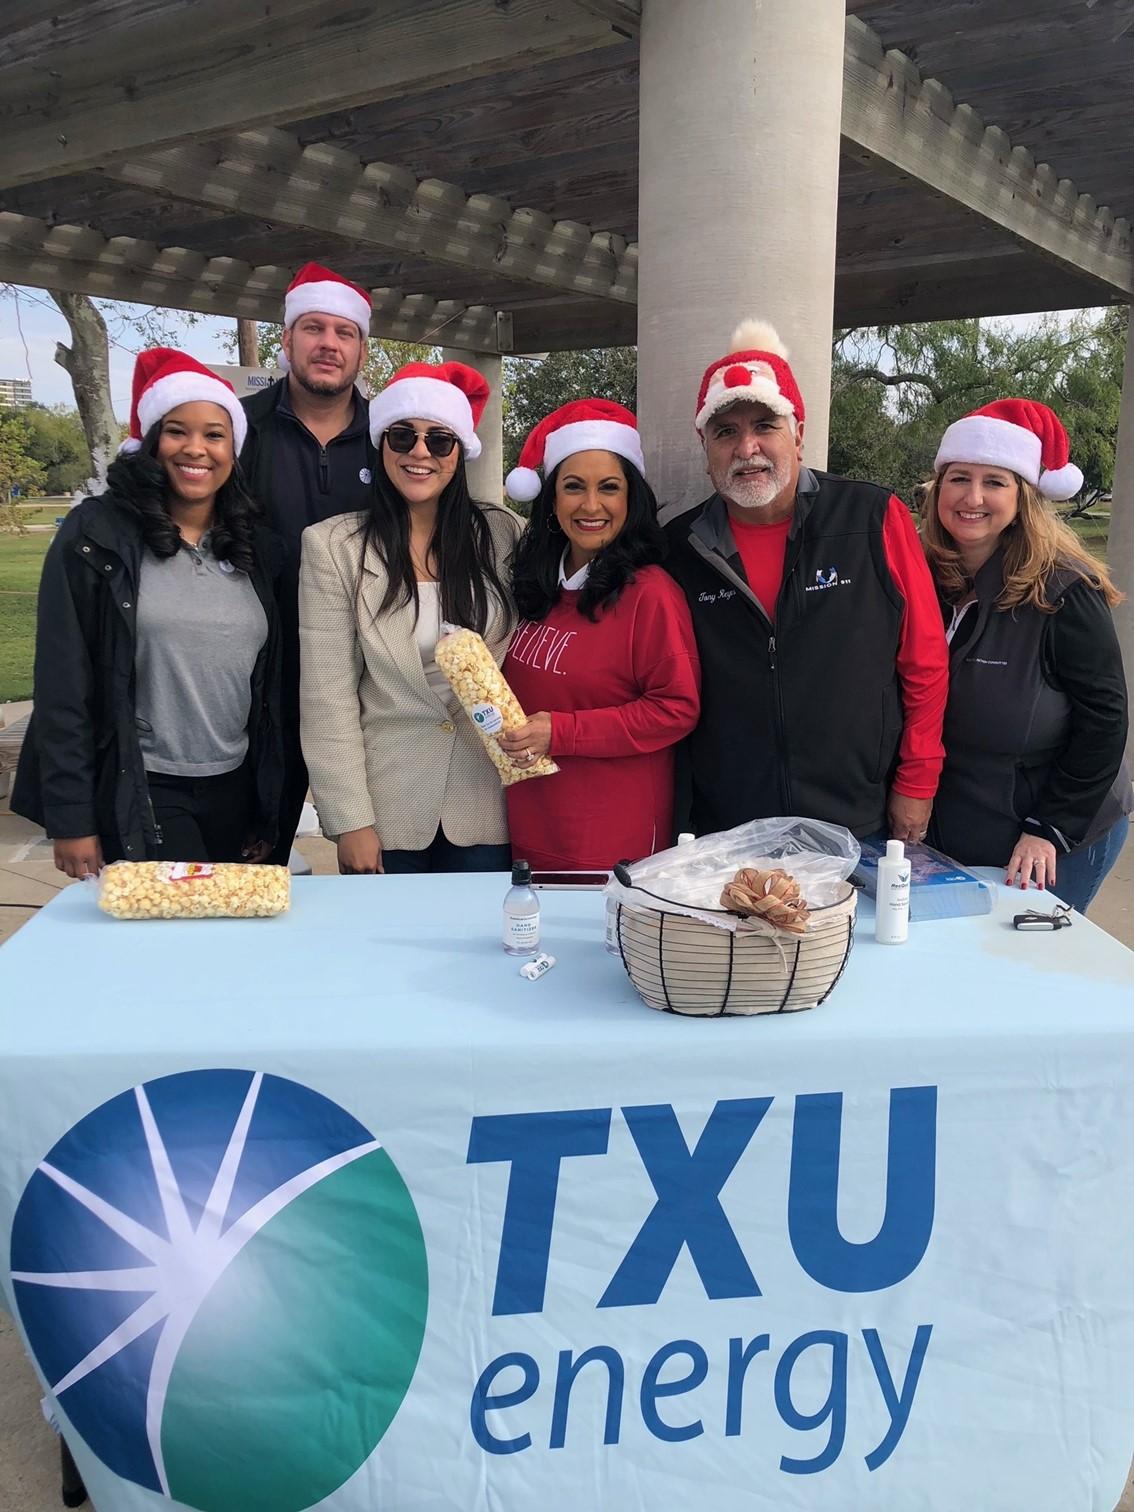 TXU energy table with 6 people with Santa hats